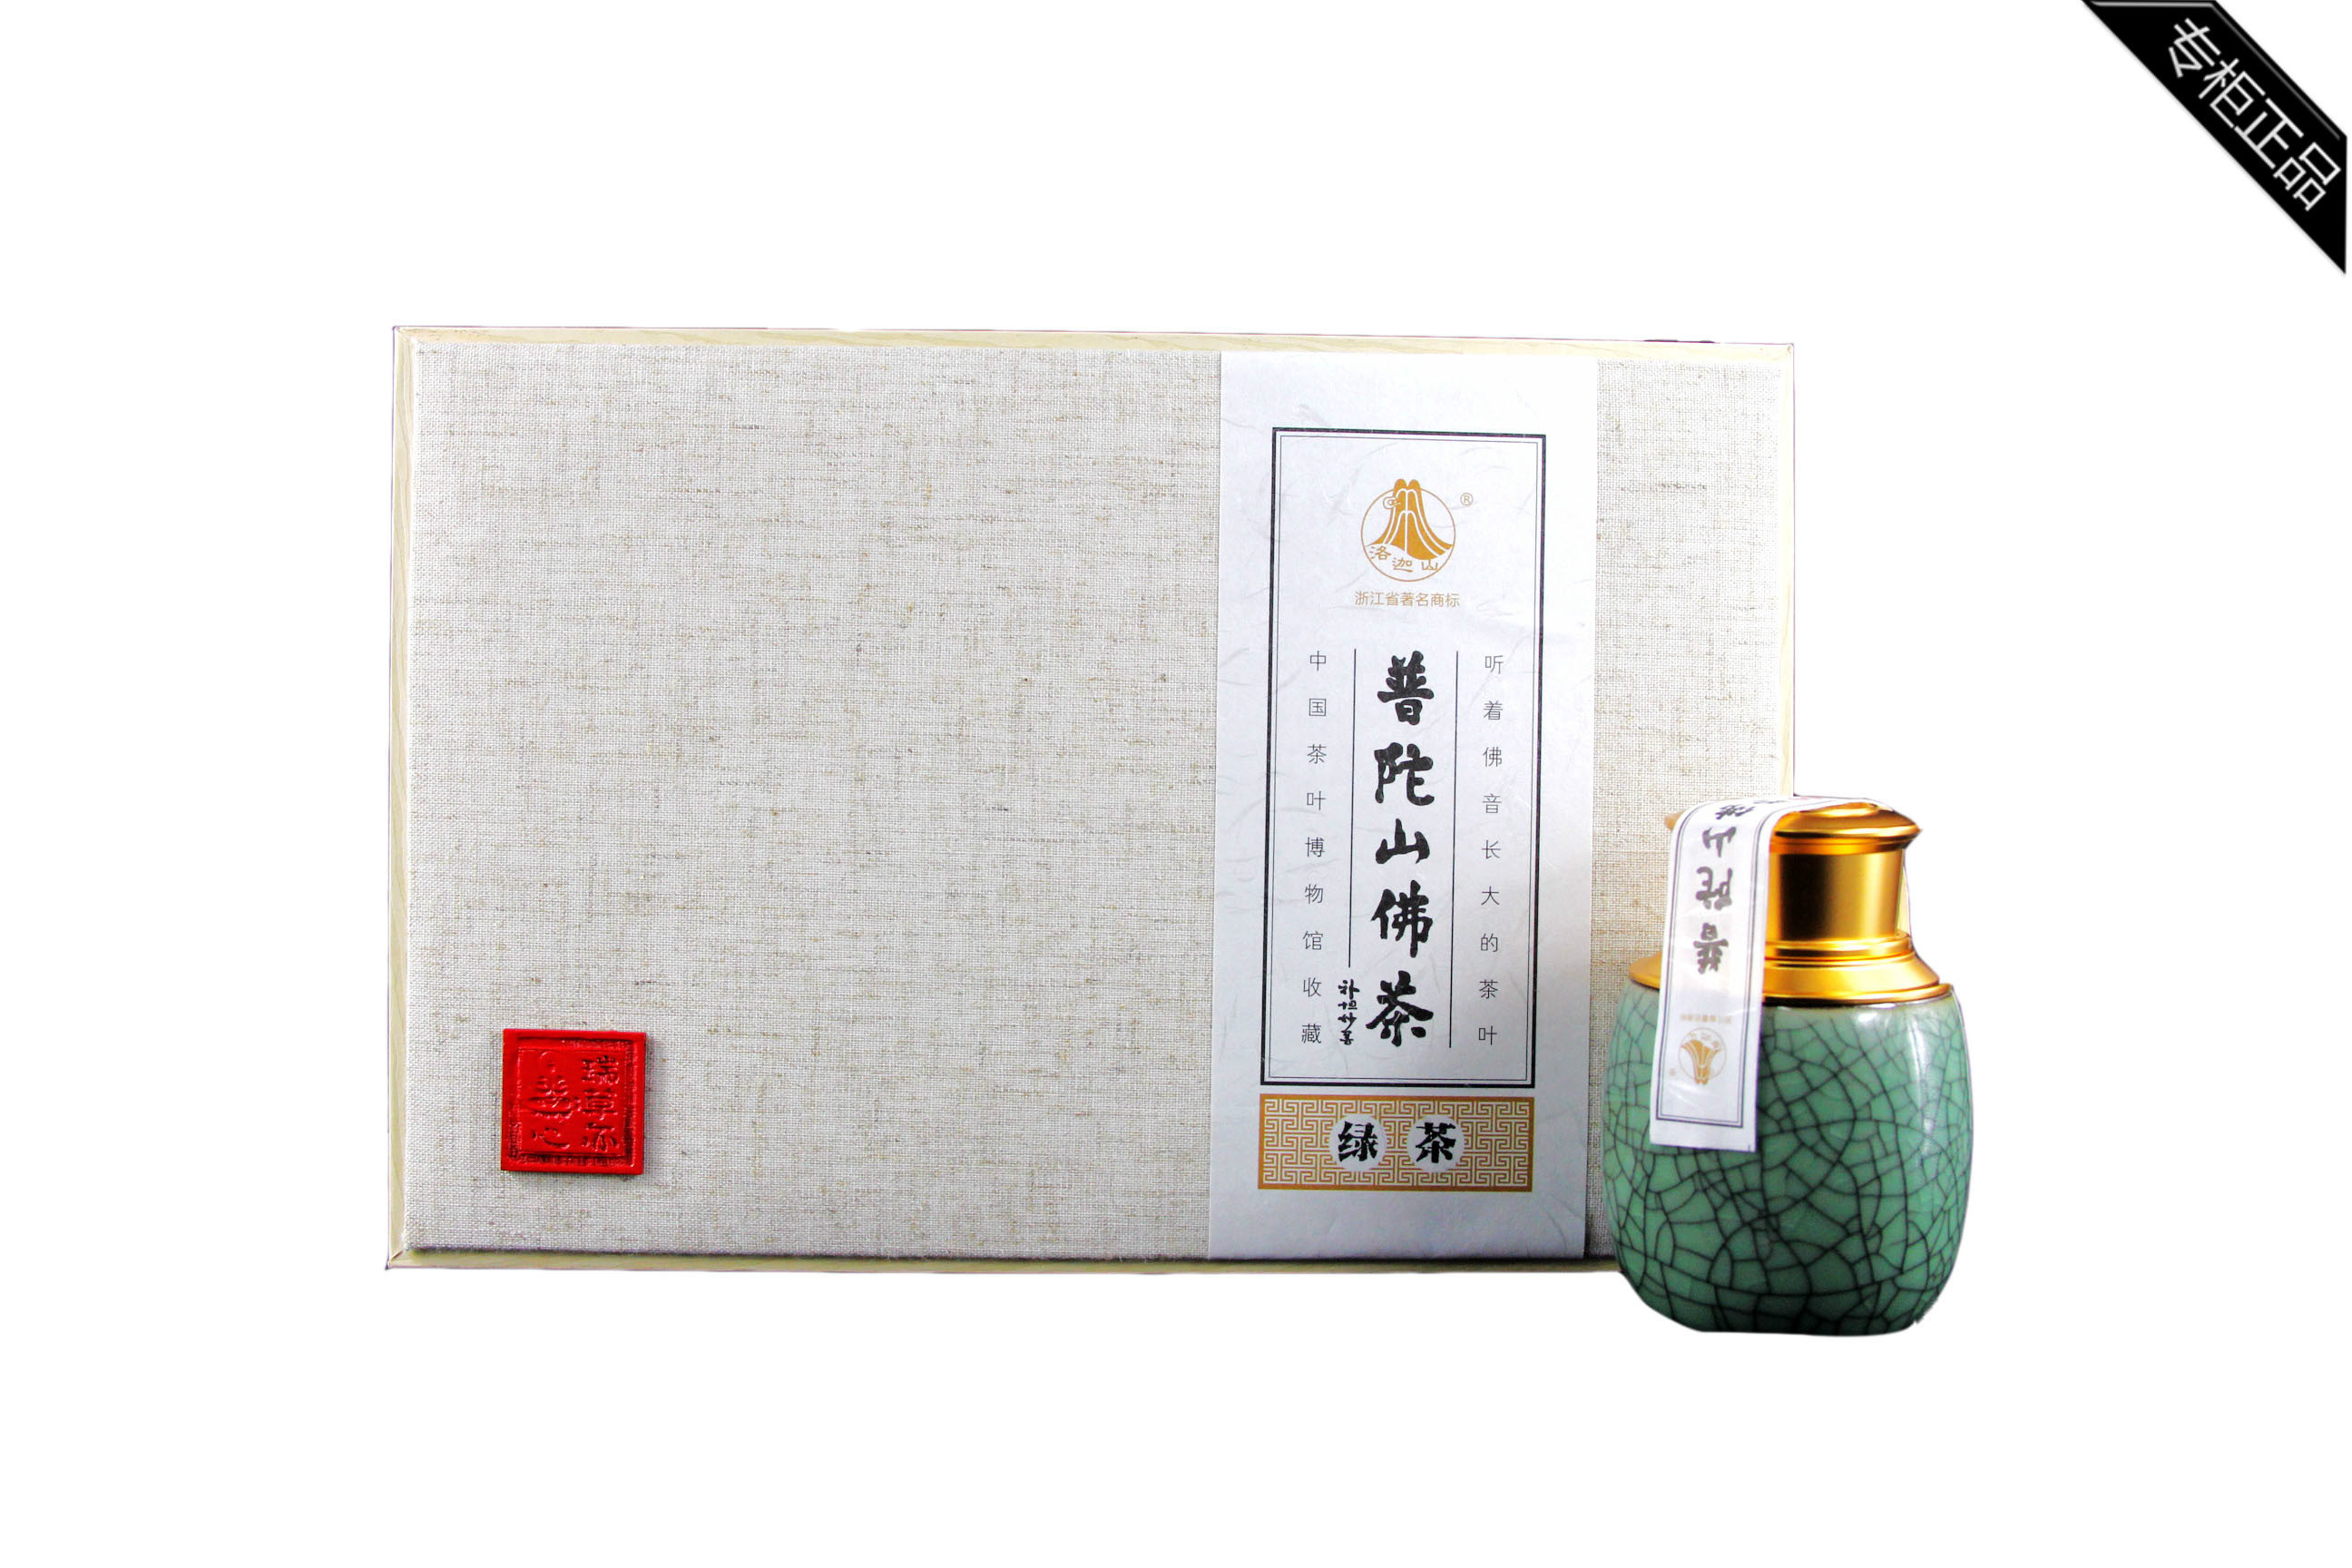 Pre-Ming tea 2019 super authentic Luojia Mountain brand Putuo Mountain Buddhist tea celadon Longquan collection produced in Foding Mountain